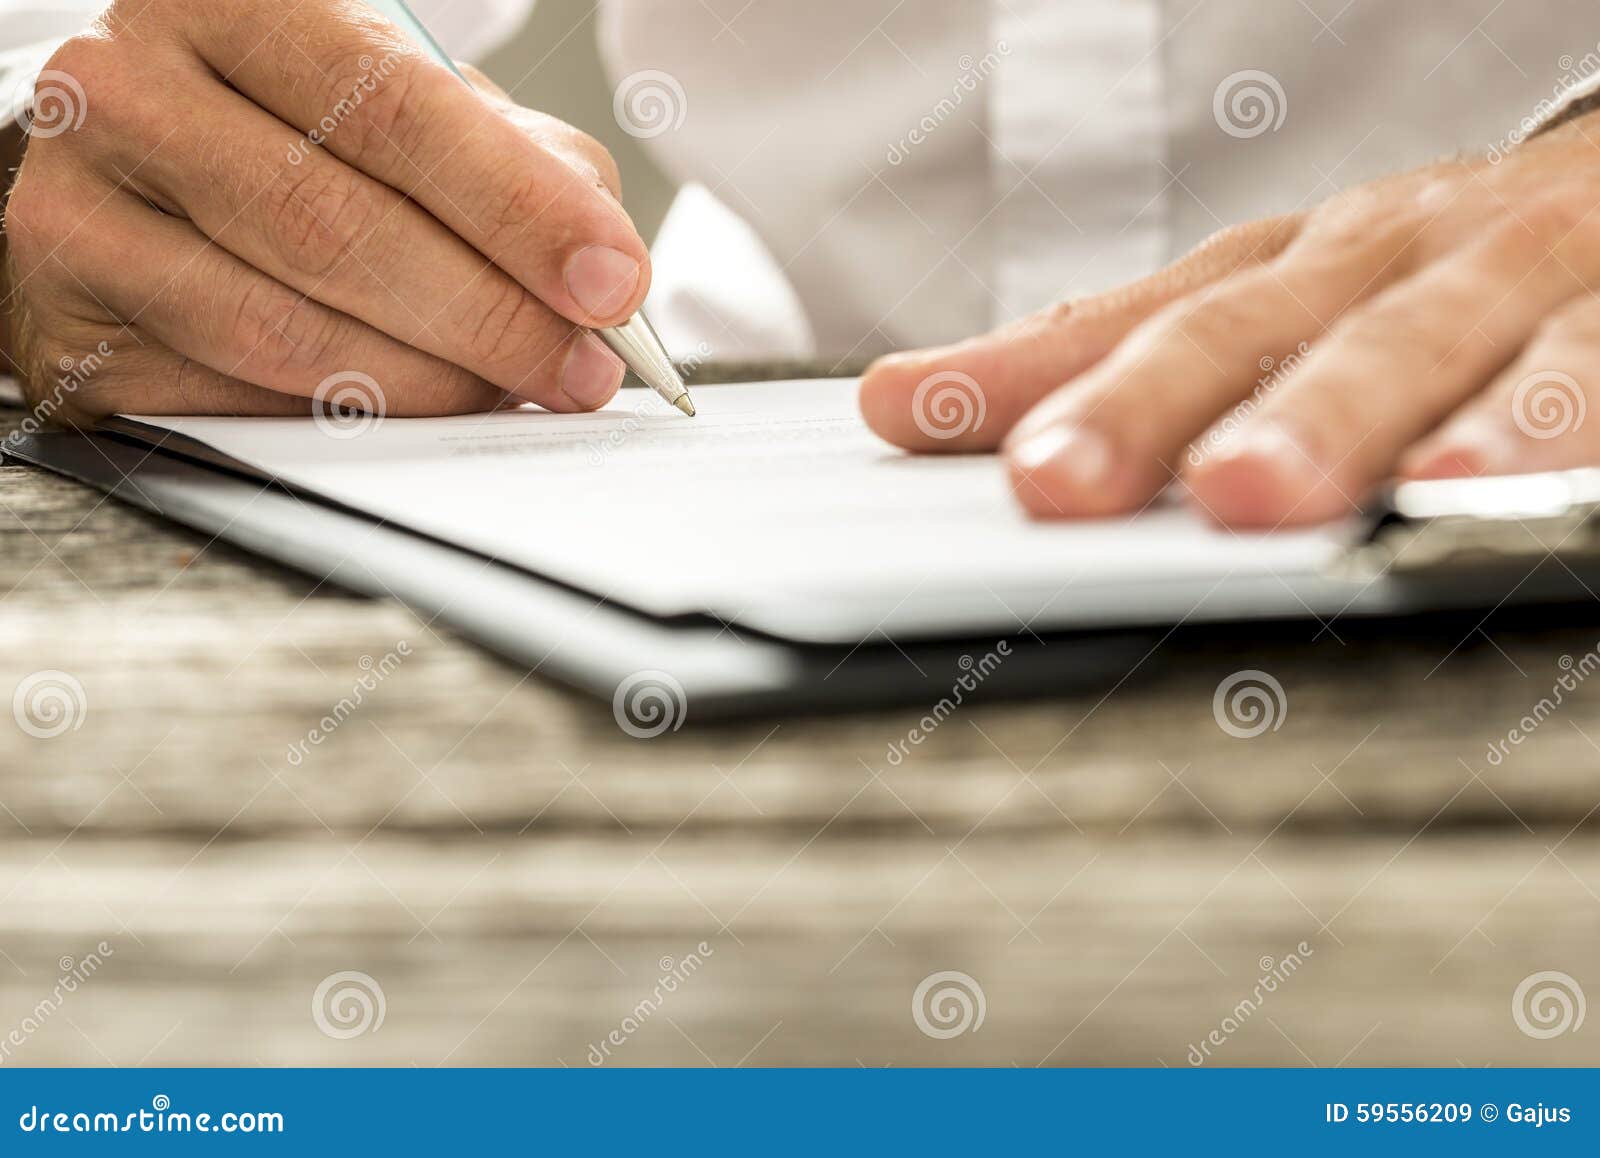 low angle view of male hand signing contract or subscription for